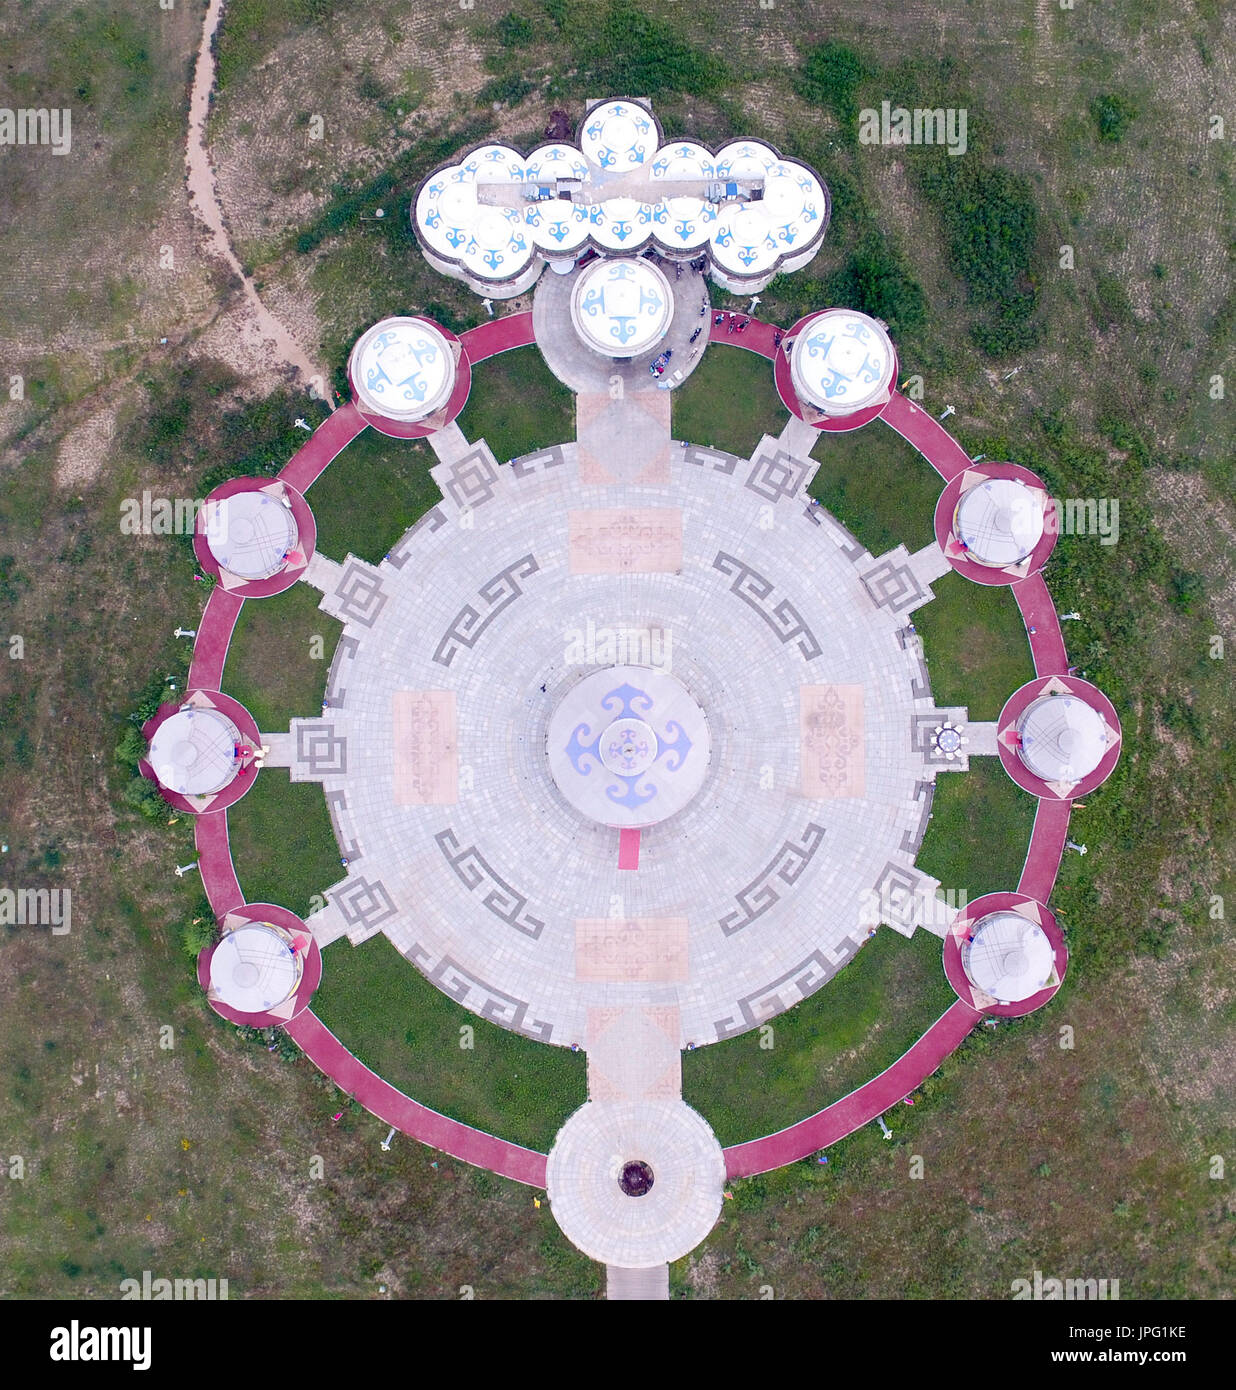 Hohhot. 1st Aug, 2017. Photo taken on Aug. 1, 2017 shows Mongolian yurts at Manduhai Park in Hohhot, capital of north China's Inner Mongolia Autonomous Region. This group of photos taken by drones shows landmarks of the city, reflecting the development of the city in recent years. This year marks the 70th anniversary of the founding of the Inner Mongolia Autonomous Region. In local language, Hohhot means the 'Blue City'. It is the political, economic and cultural center of the region. Credit: Deng Hua/Xinhua/Alamy Live News Stock Photo